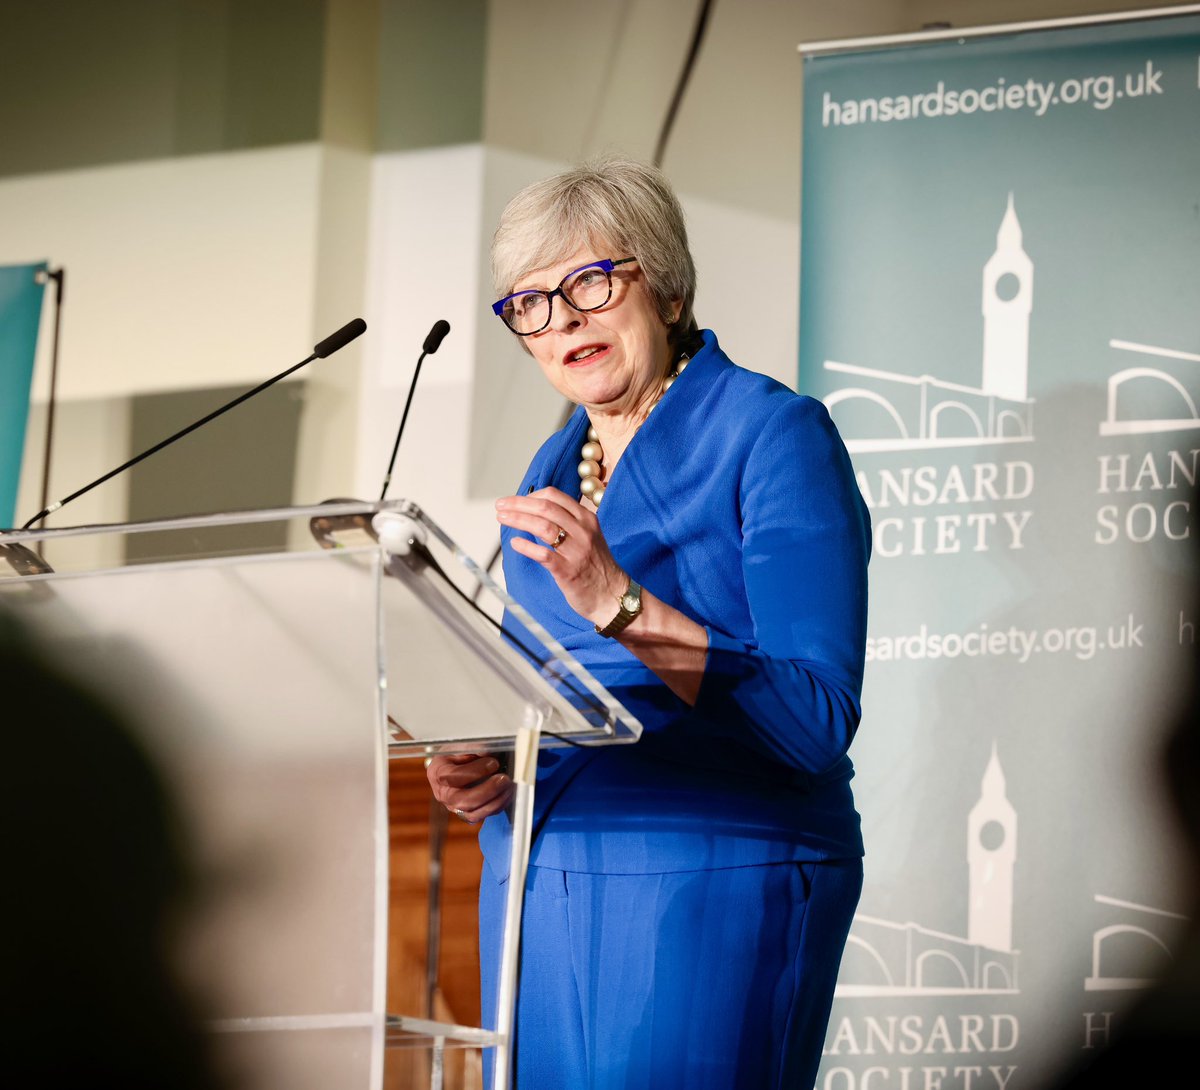 It was an honour to give the inaugural @HansardSociety Churchill-Attlee Democracy Lecture. At a time when the resilience of our democratic values are being tested like never before we must do all we can to defend them.